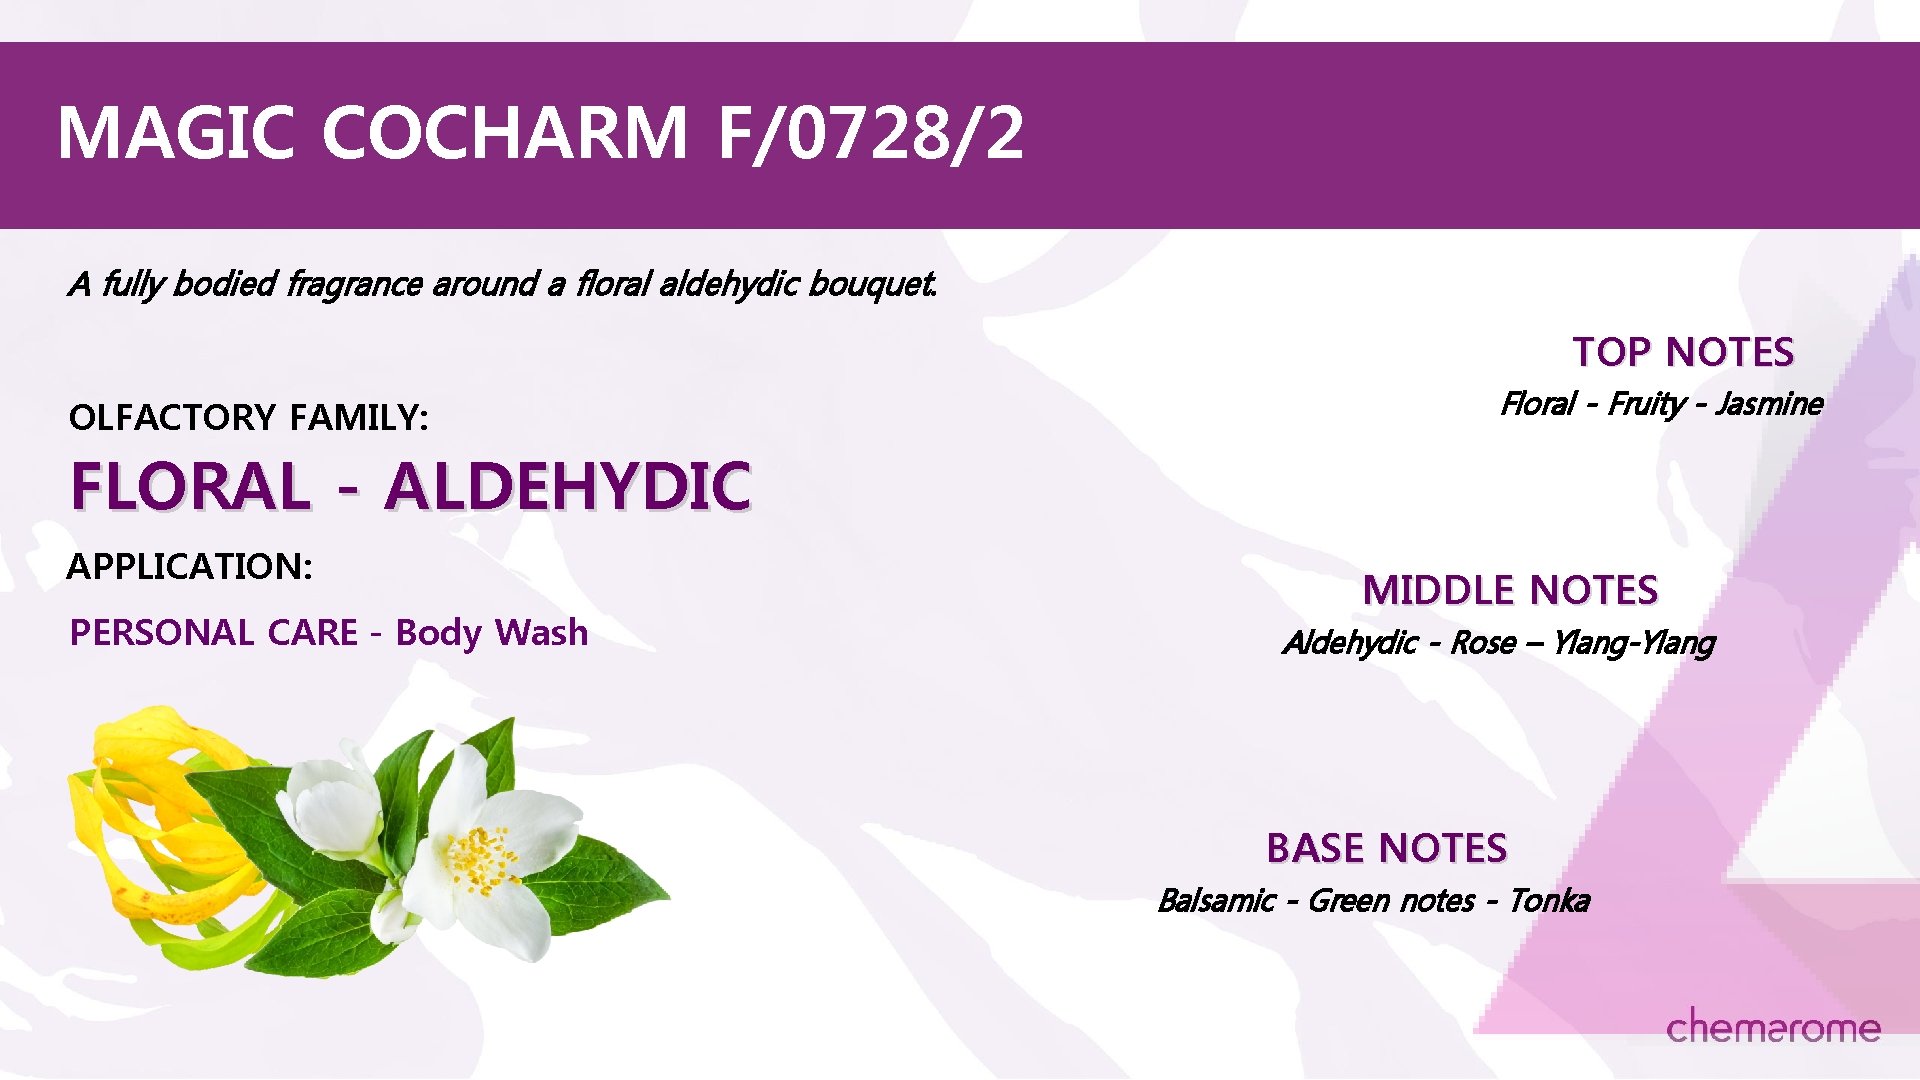 MAGIC COCHARM F/0728/2 A fully bodied fragrance around a floral aldehydic bouquet. TOP NOTES